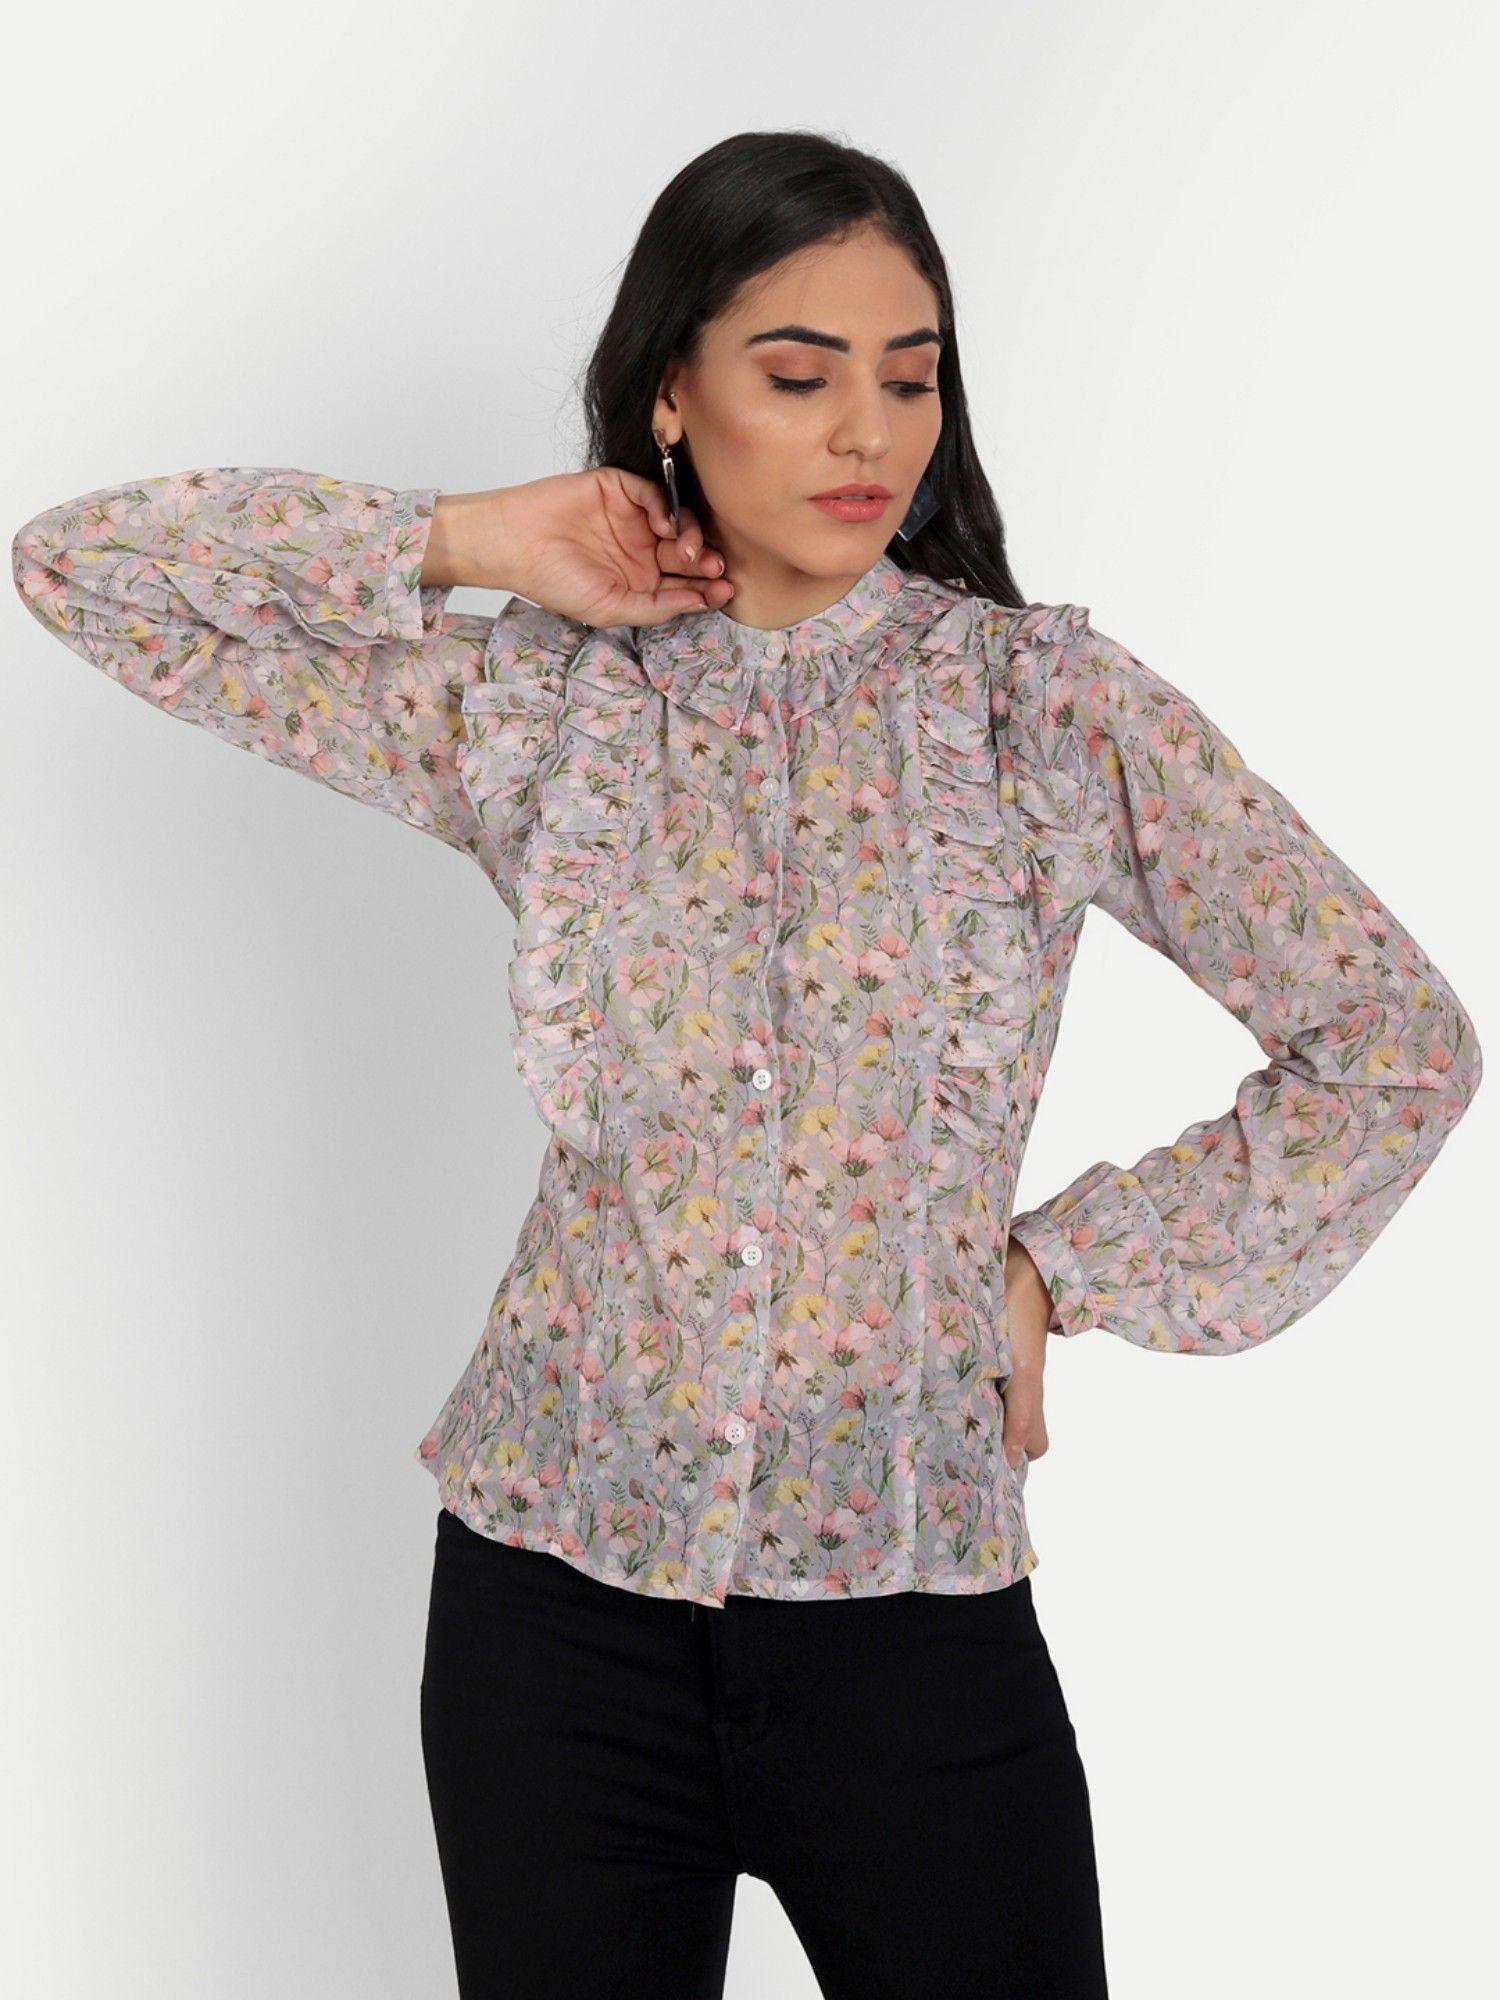 grey floral print georgette shirt style top